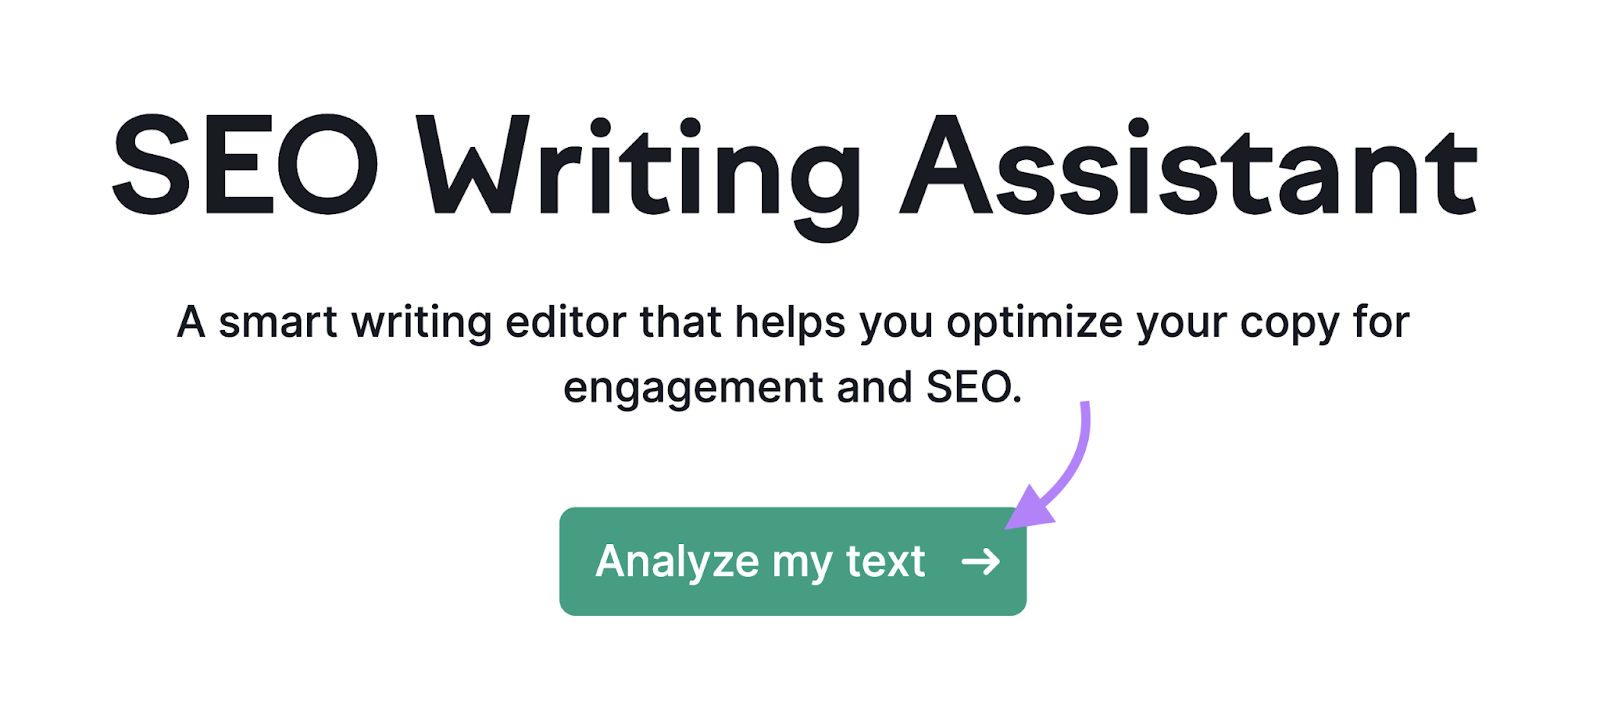 “Analyze my text" button selected under SEO Writing Assistant